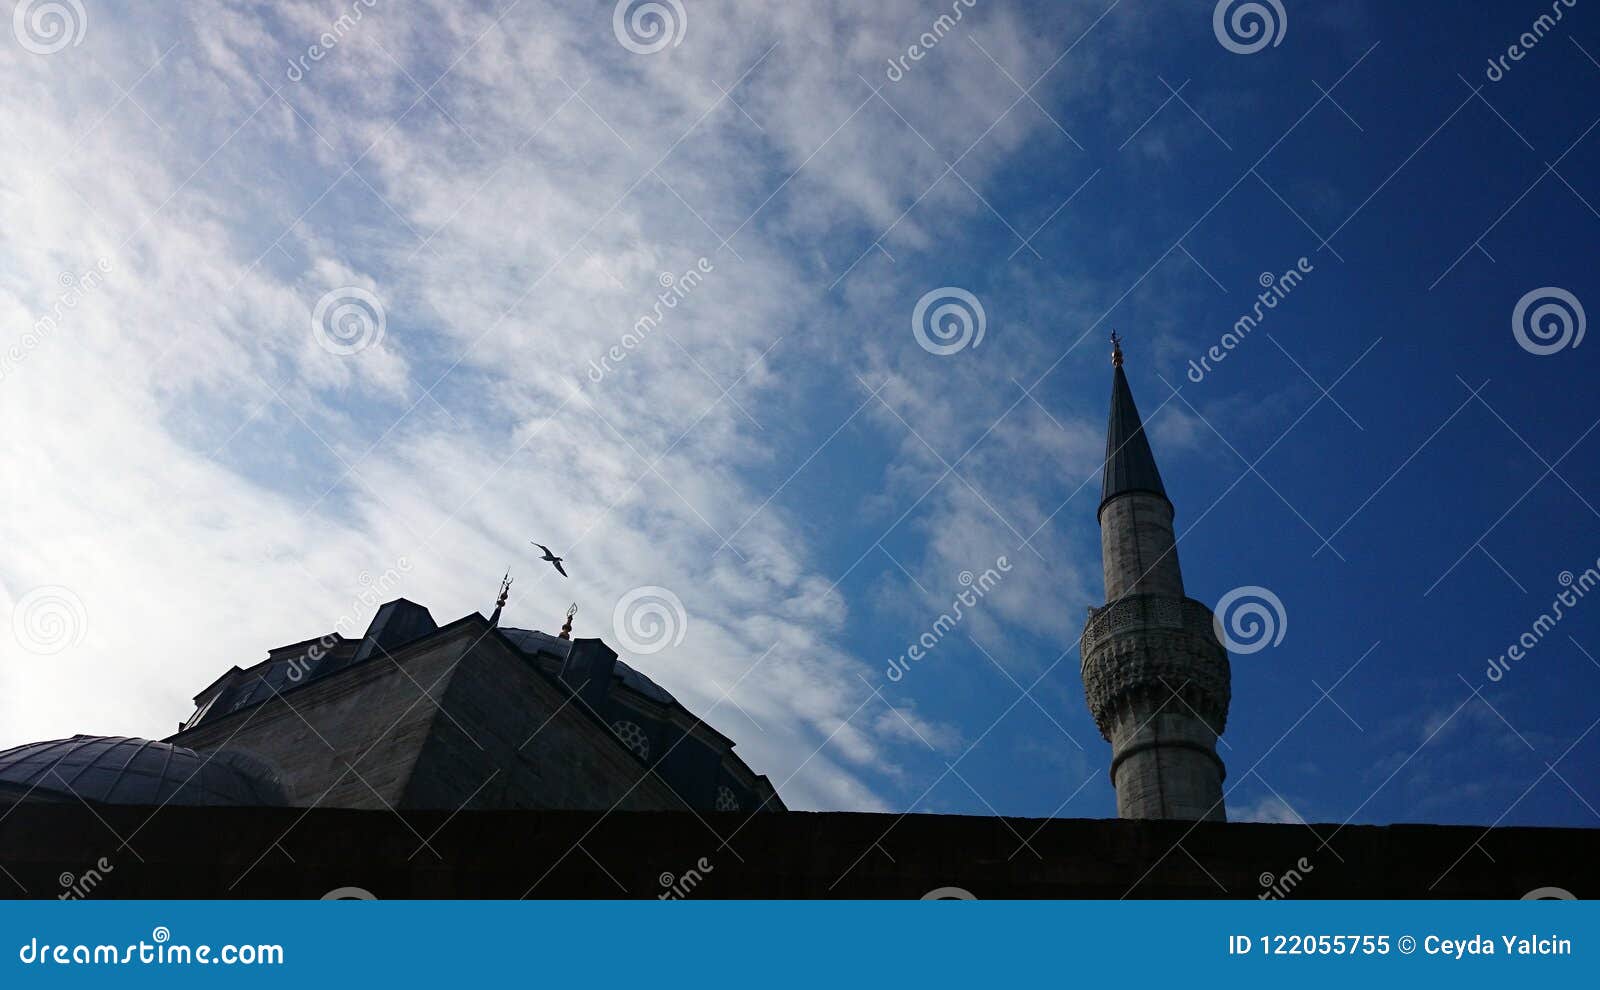 skie and mosque